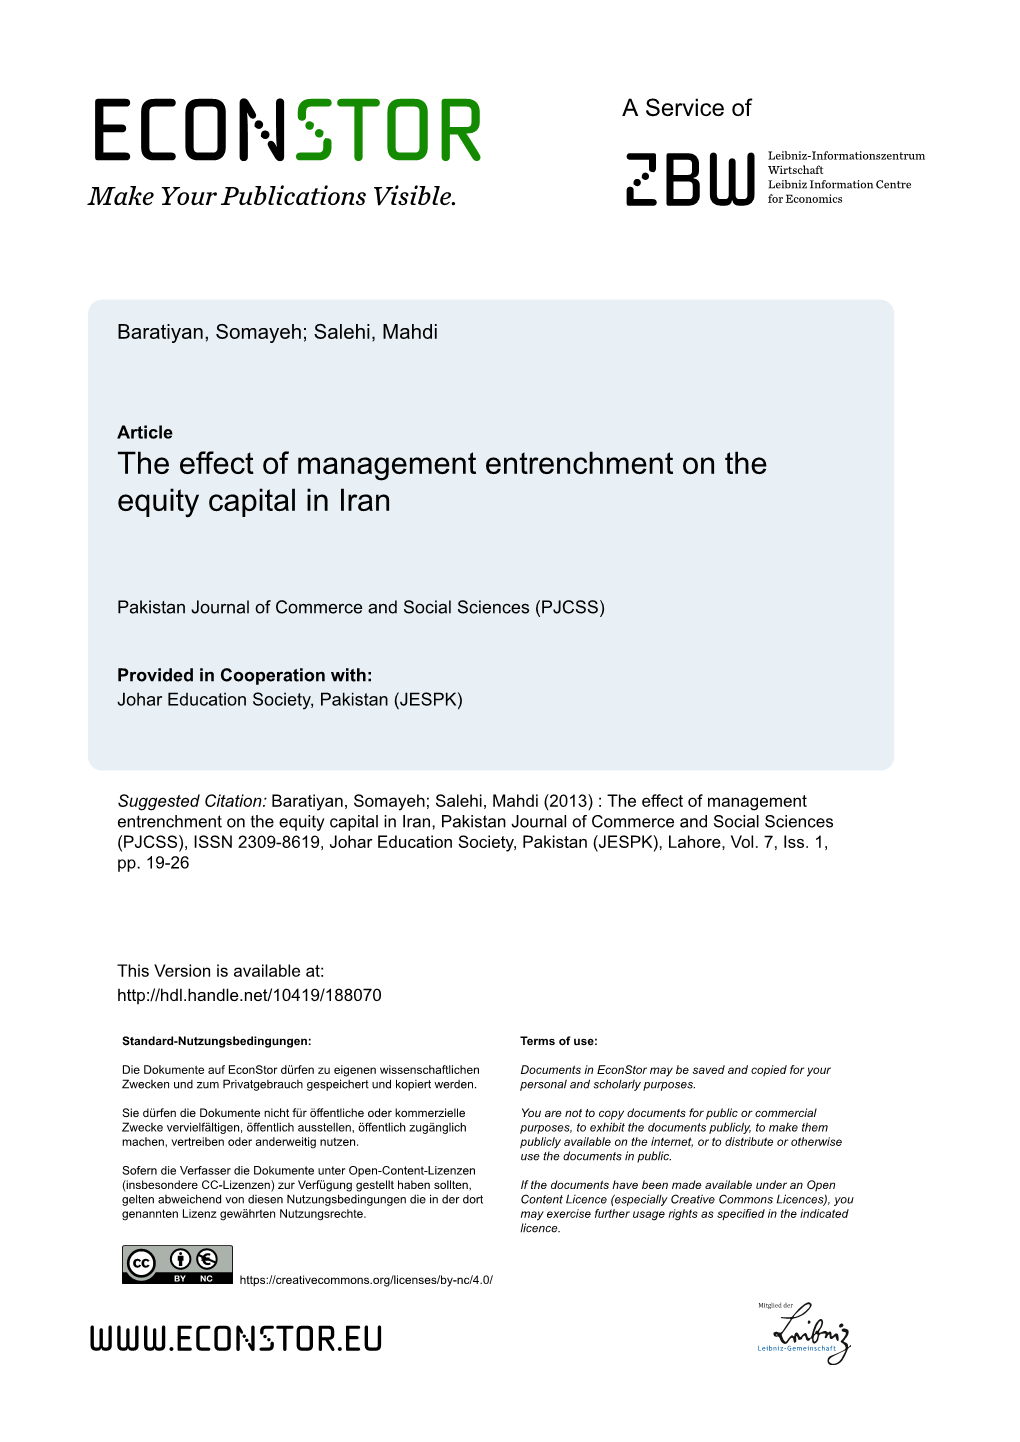 The Effect of Management Entrenchment on the Equity Capital in Iran